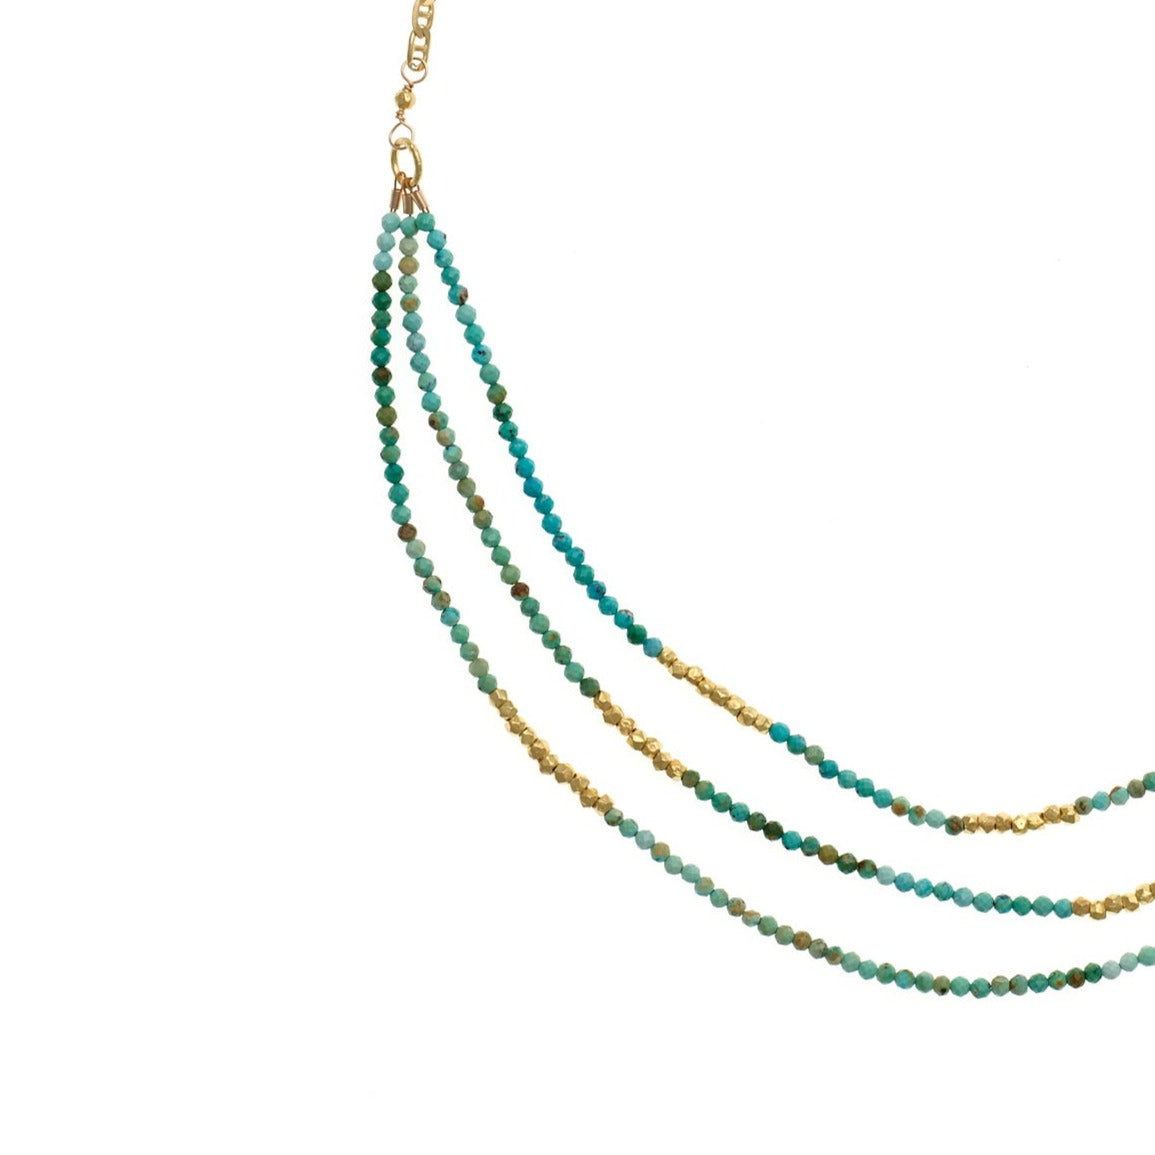 Triple-Strand Turquoise Necklace